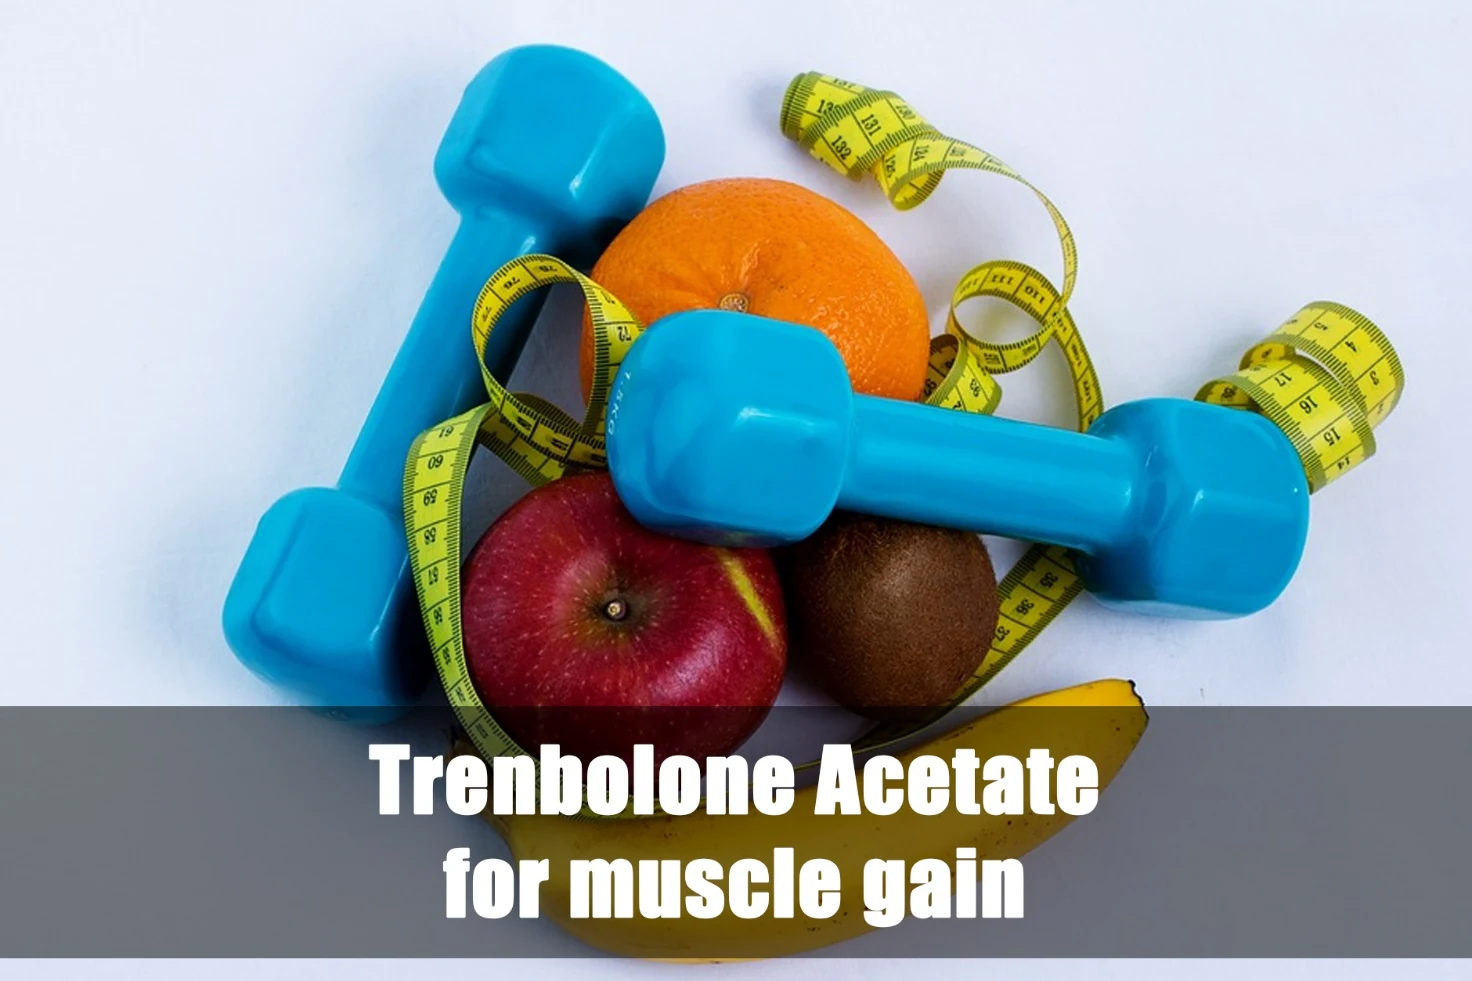 Trenbolone Acetate for muscle gain